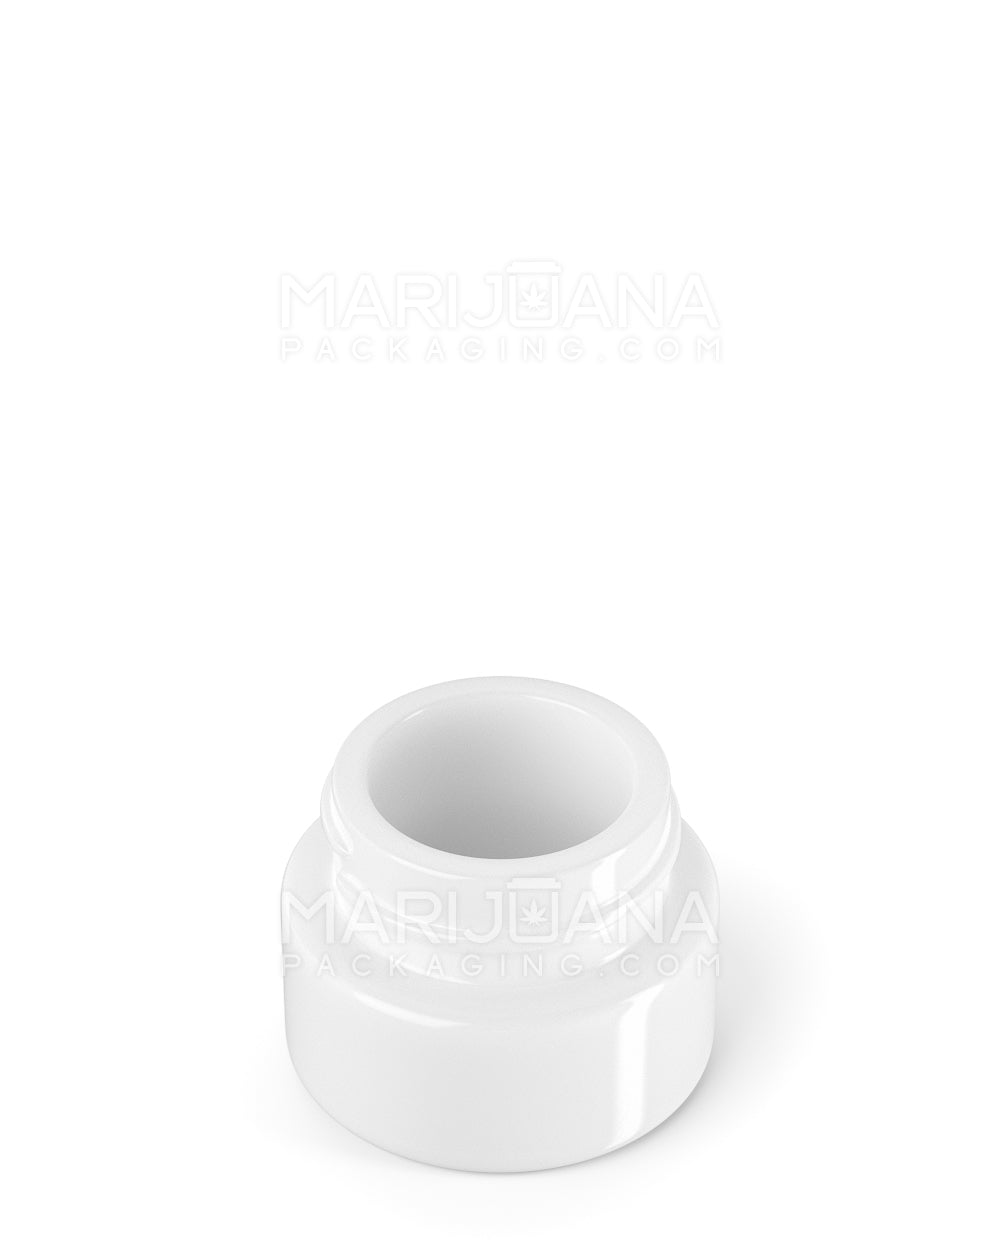 Glossy White Glass Concentrate Containers | 29mm - 5mL - 504 Count - 2